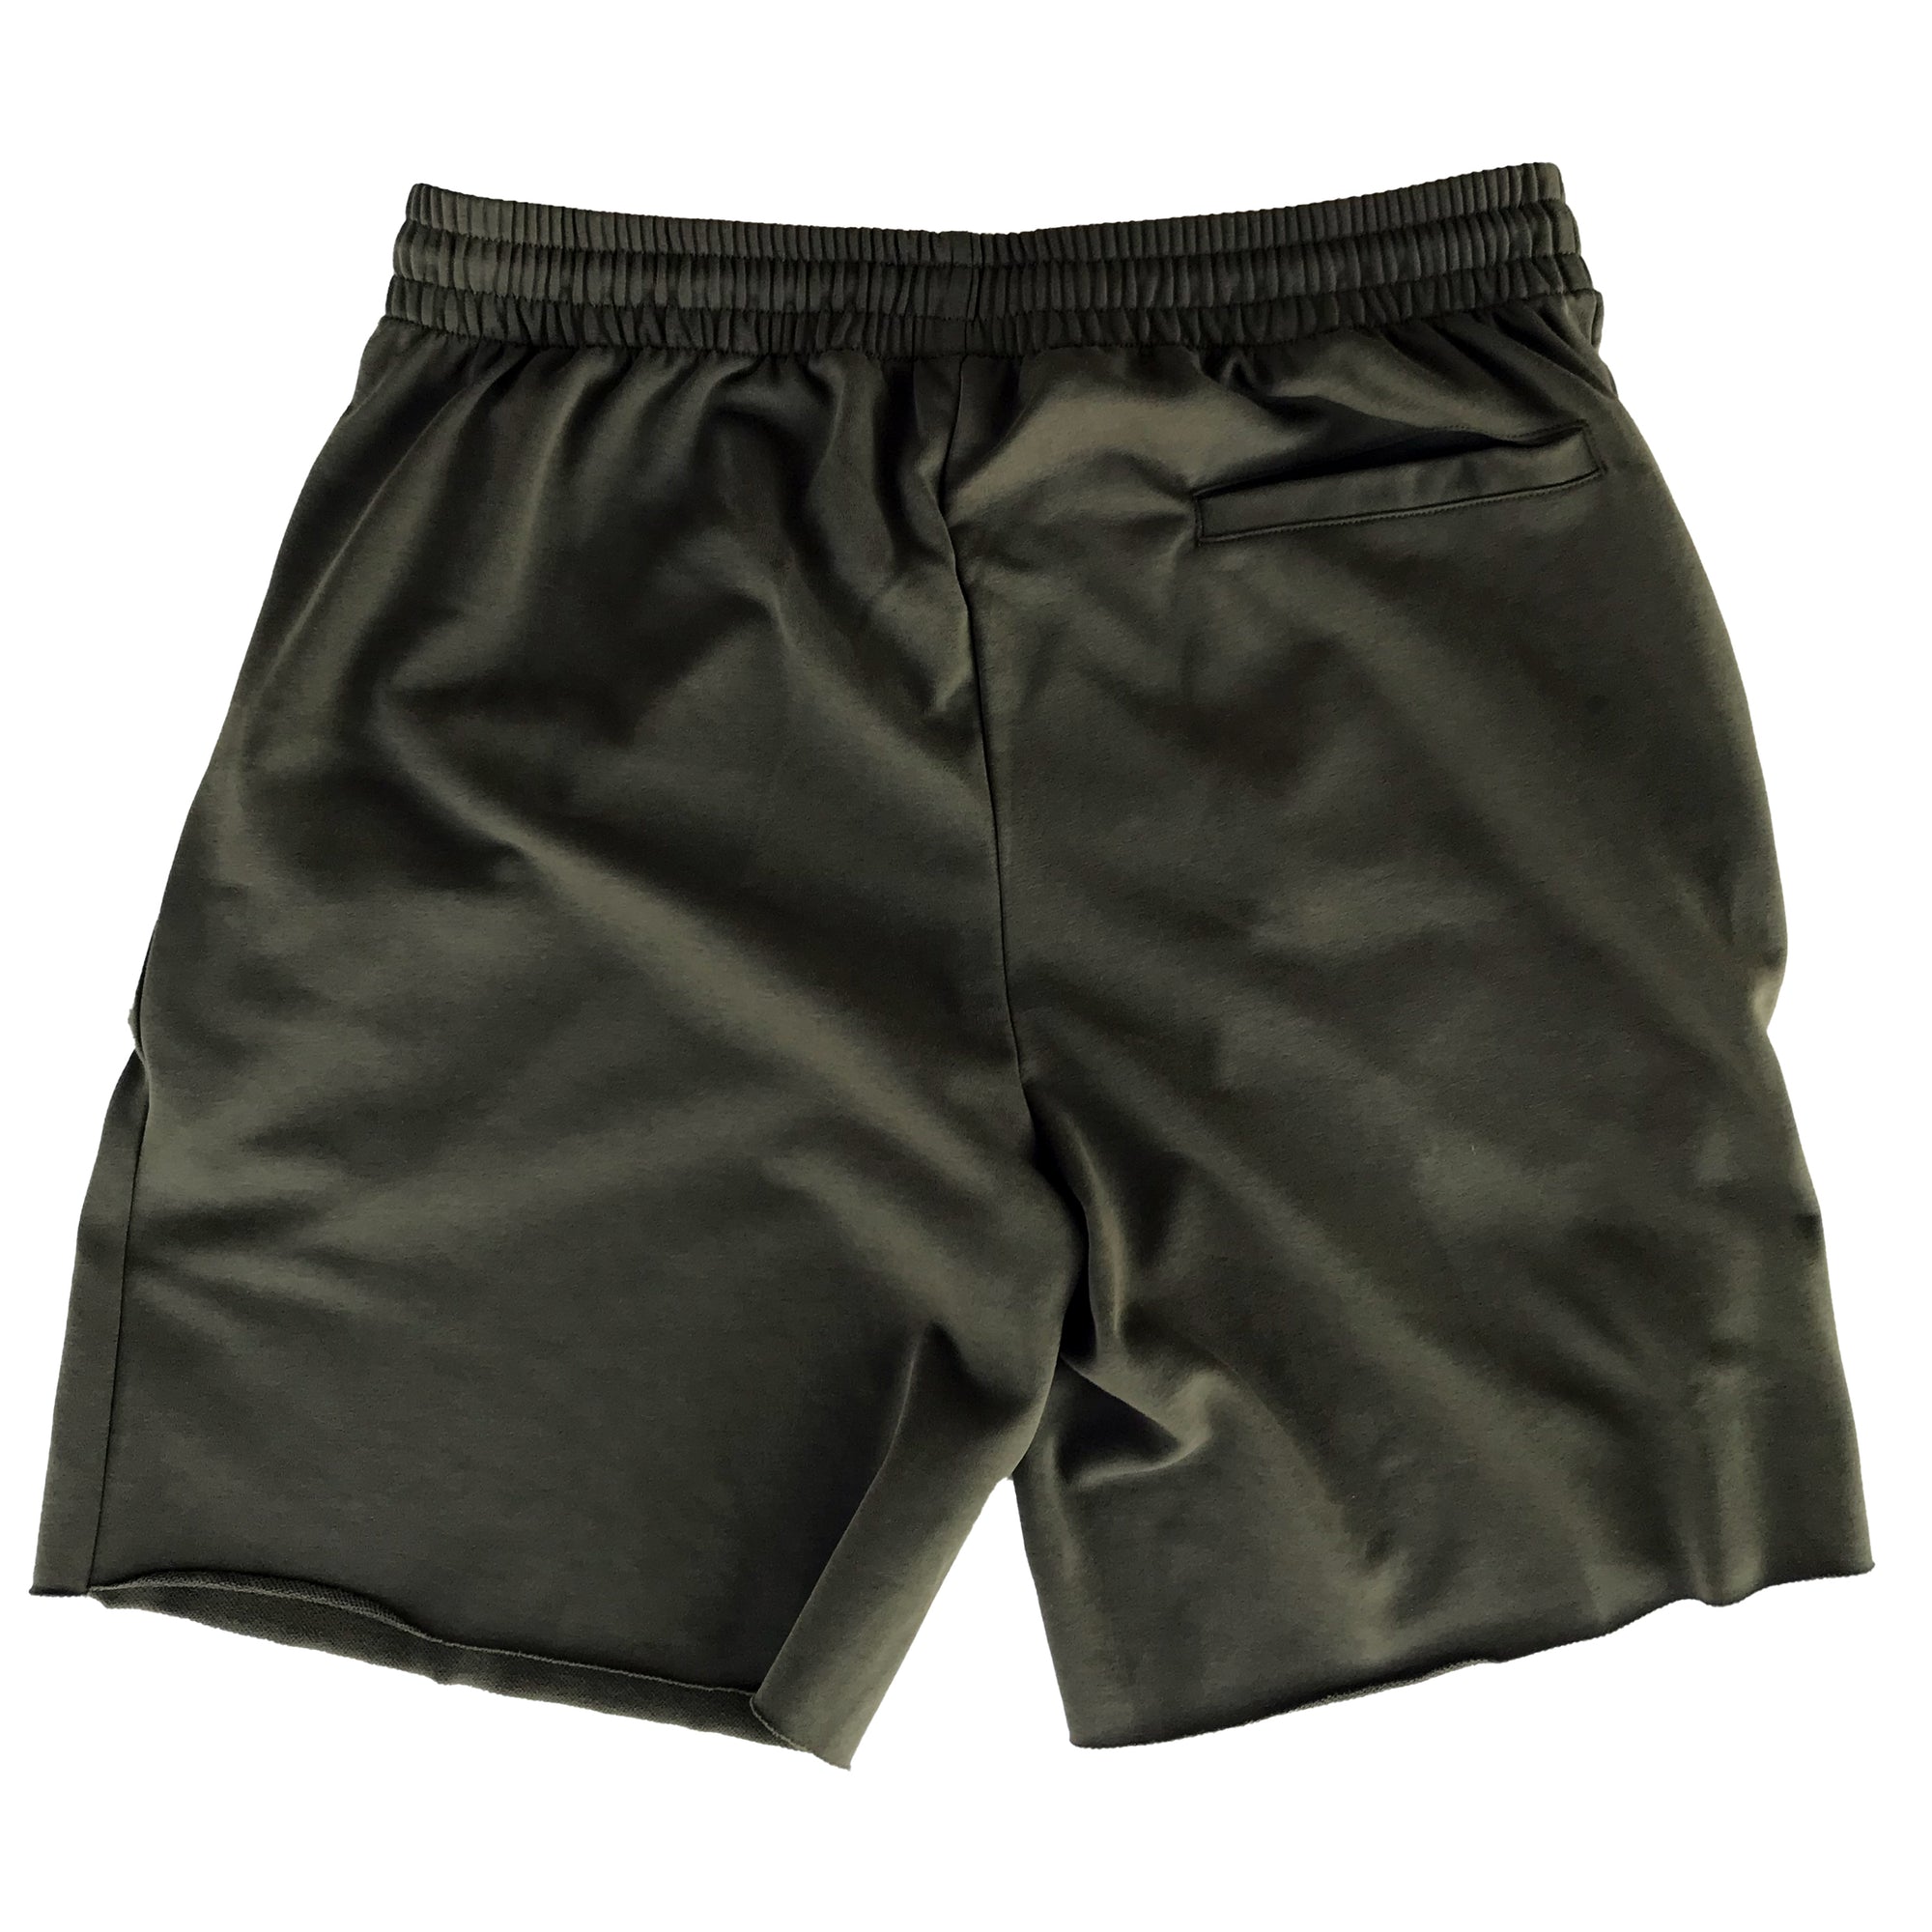 FIGHTER'S CLUB SHORTS - OLIVE